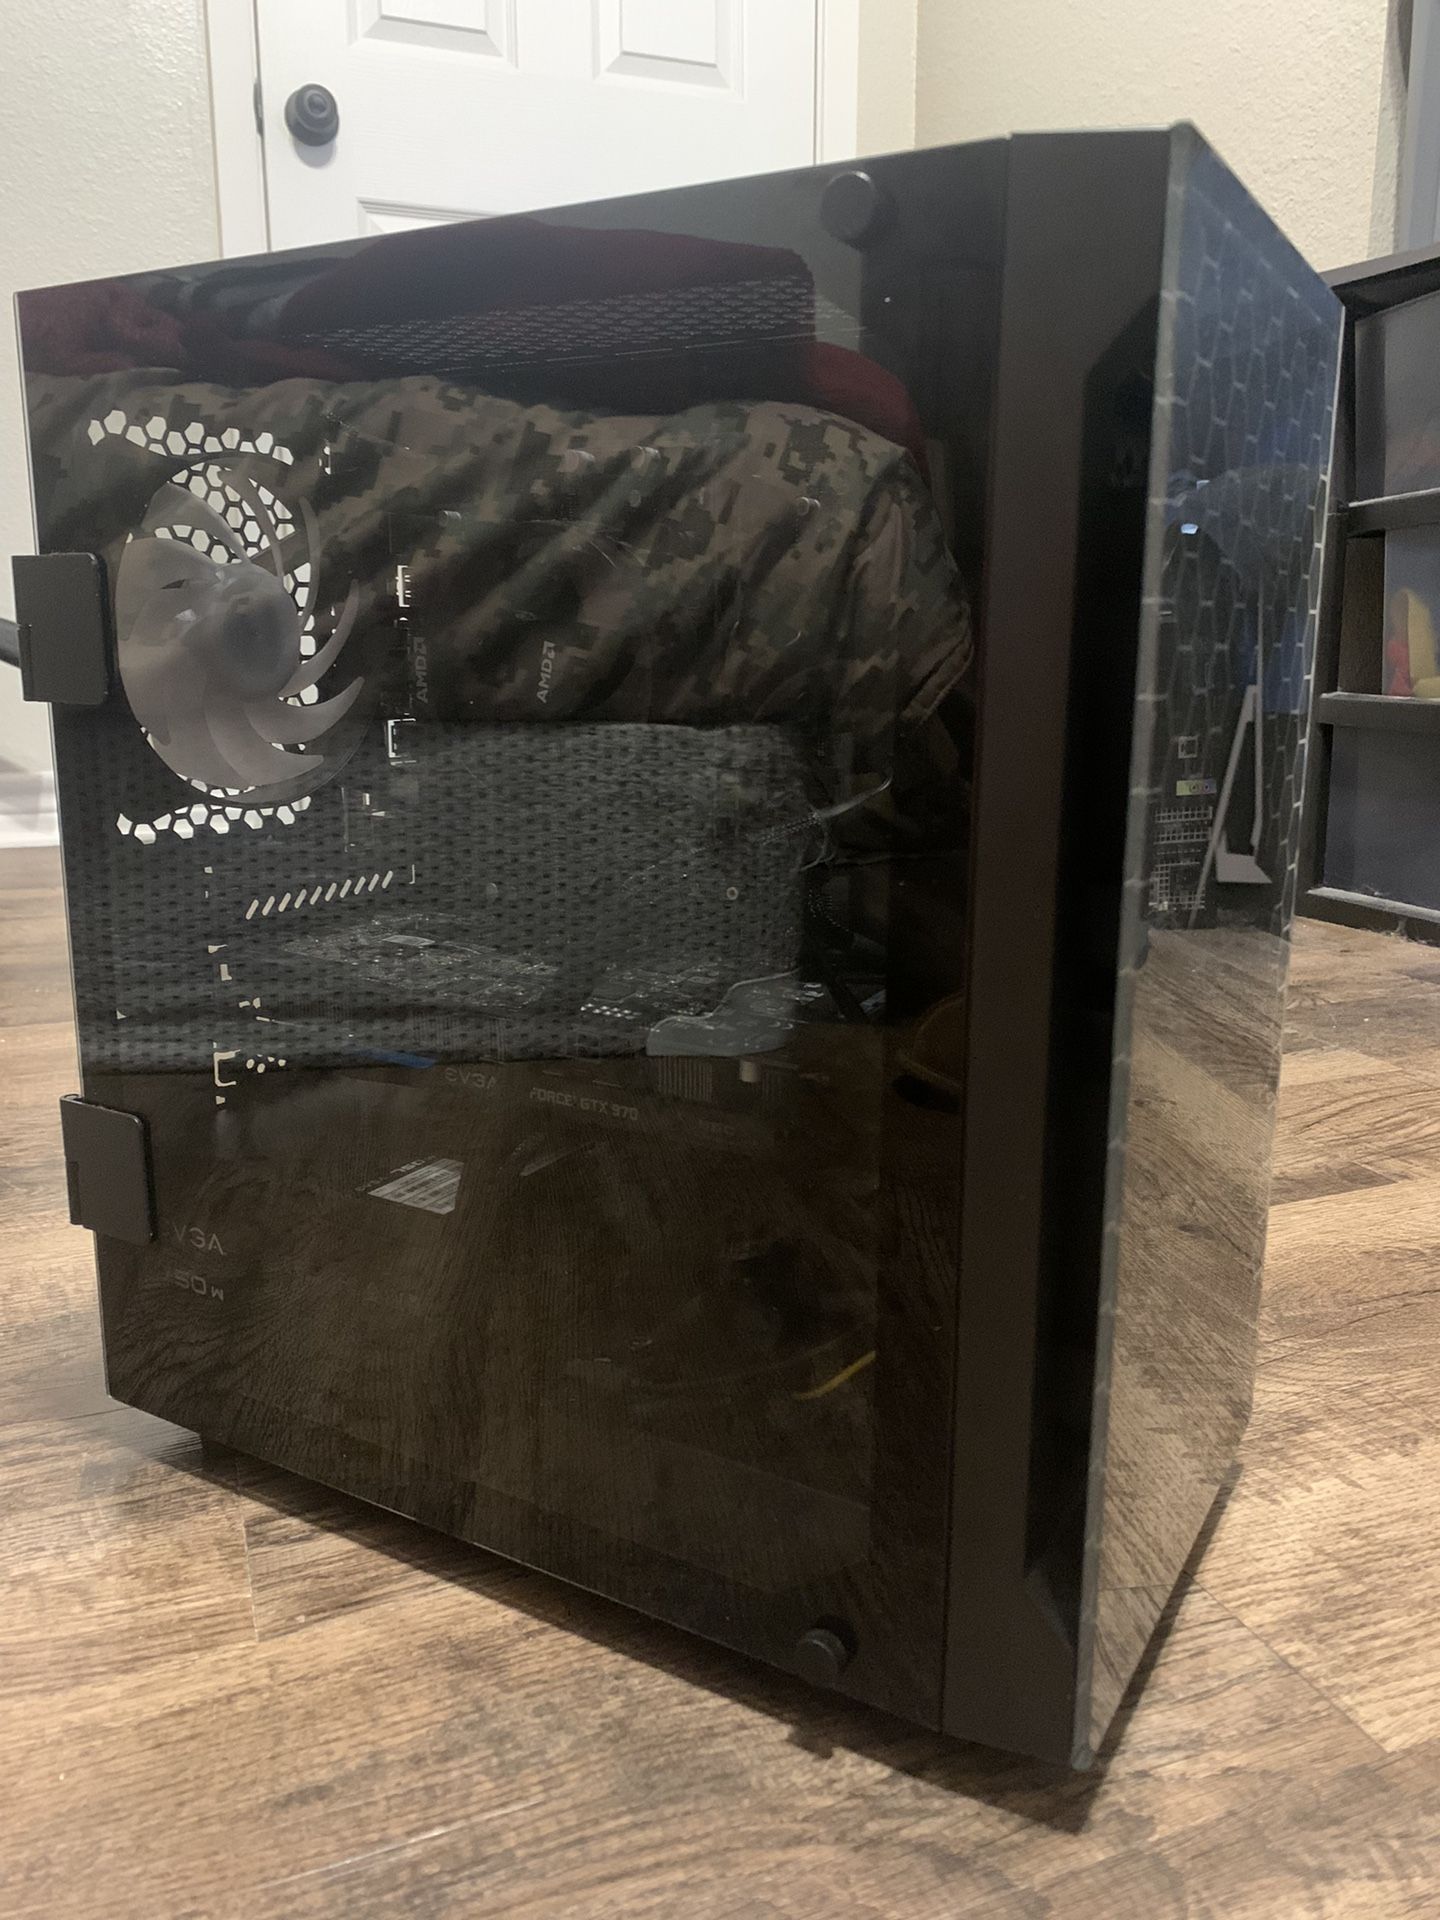 Pair Of Gaming Computers| Sold AS IS